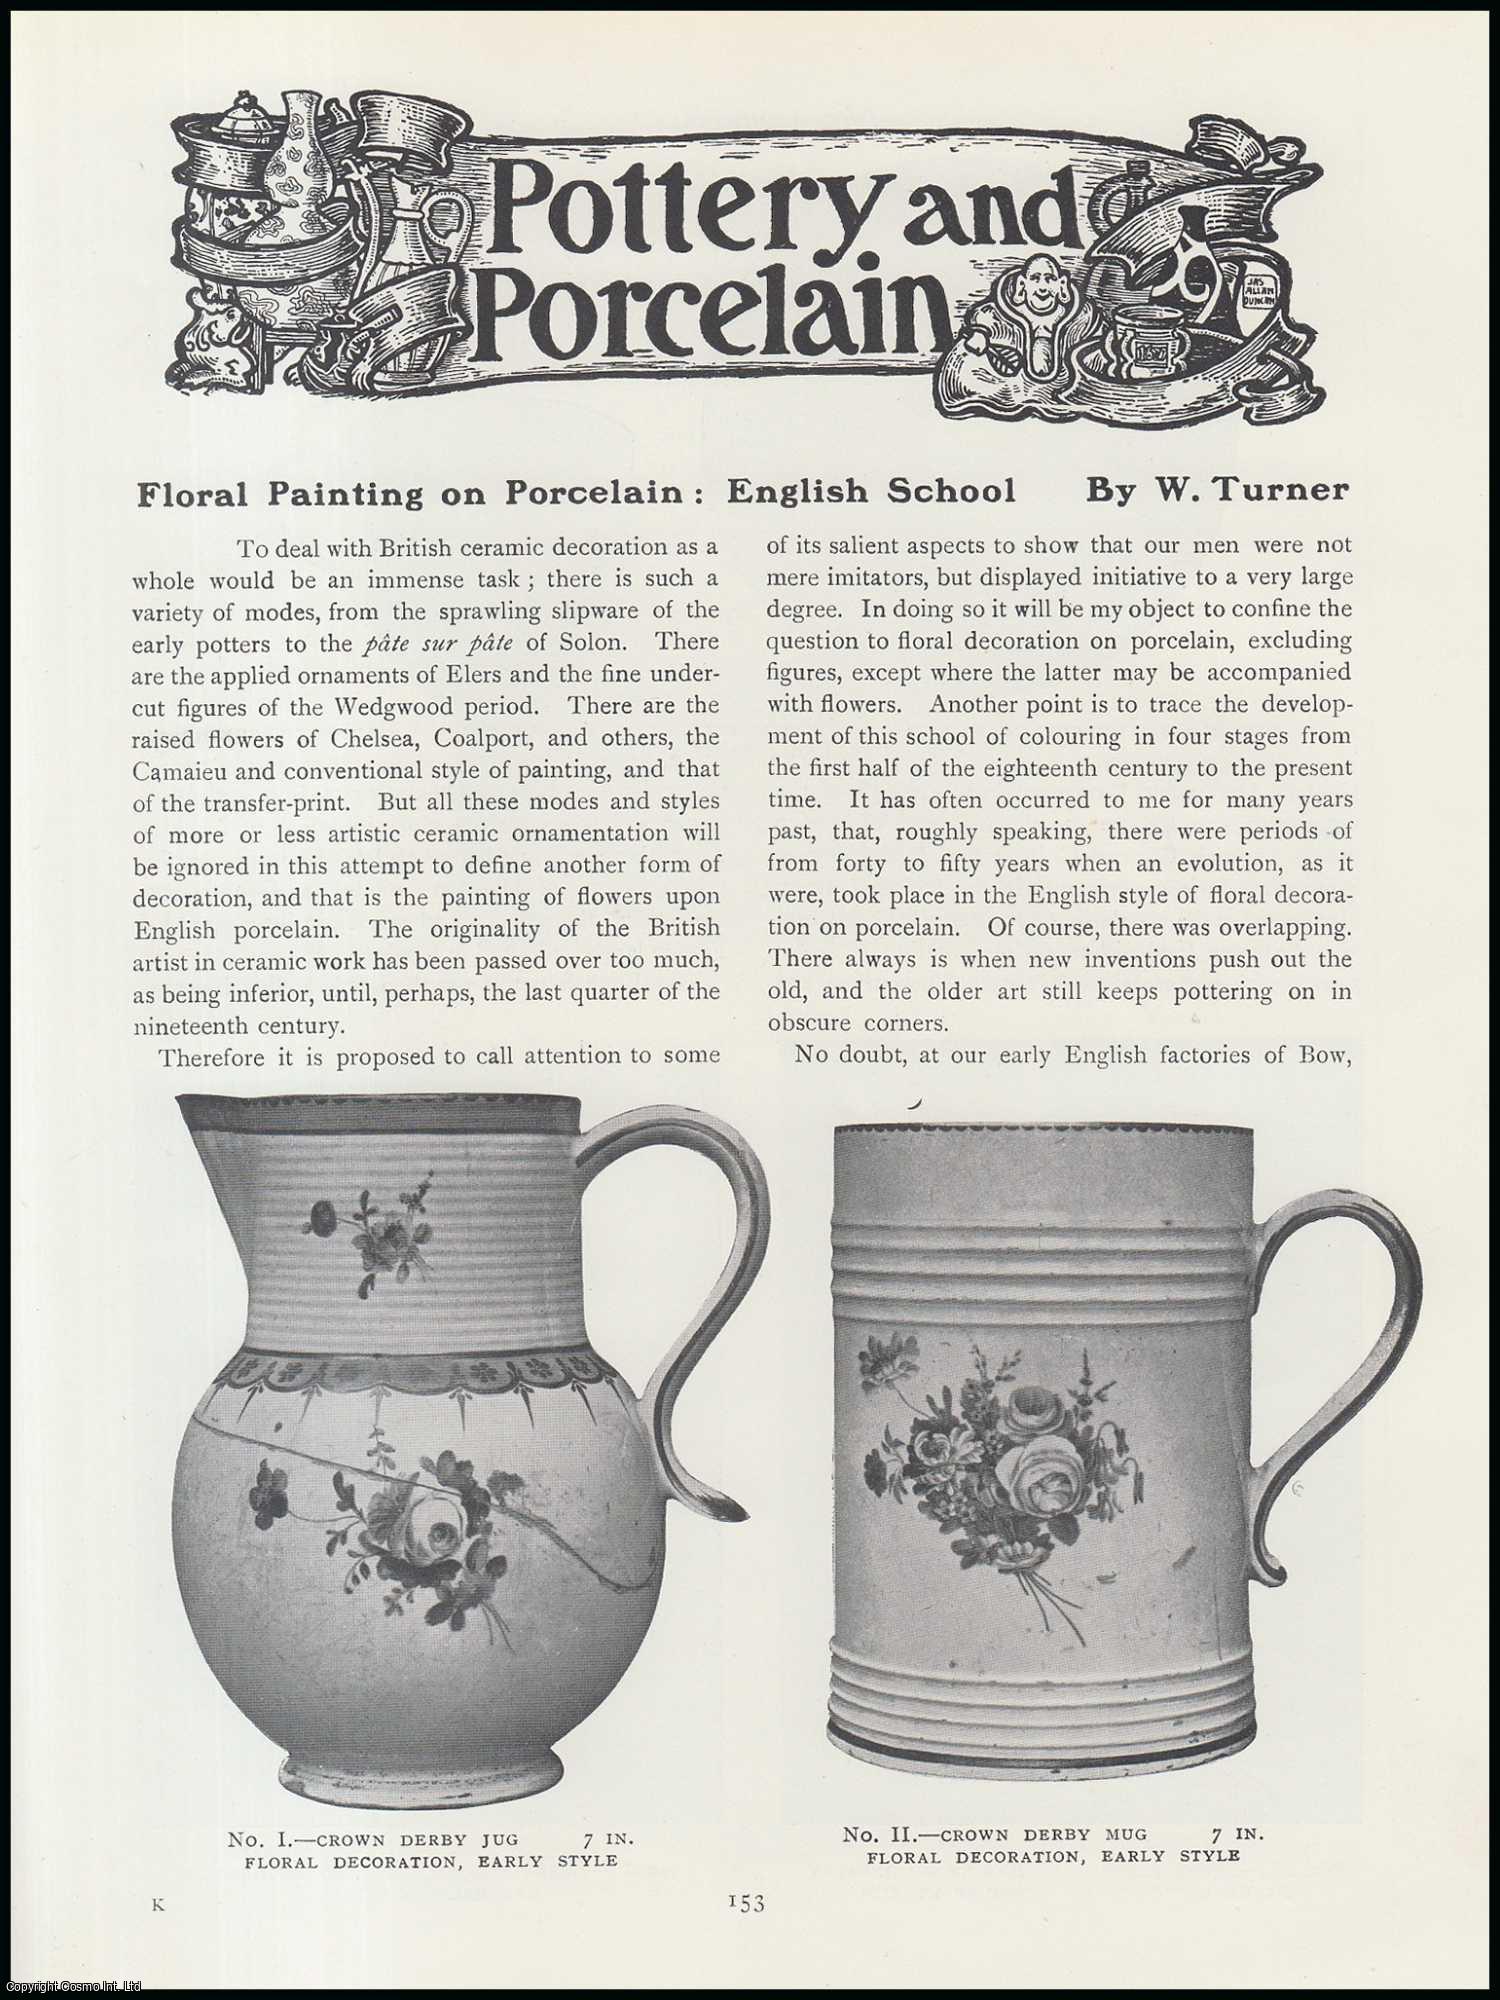 W. Turner - Floral Painting on Porcelain : English School, Chelsea, Worcester & Derby. An original article from The Connoisseur, 1913.